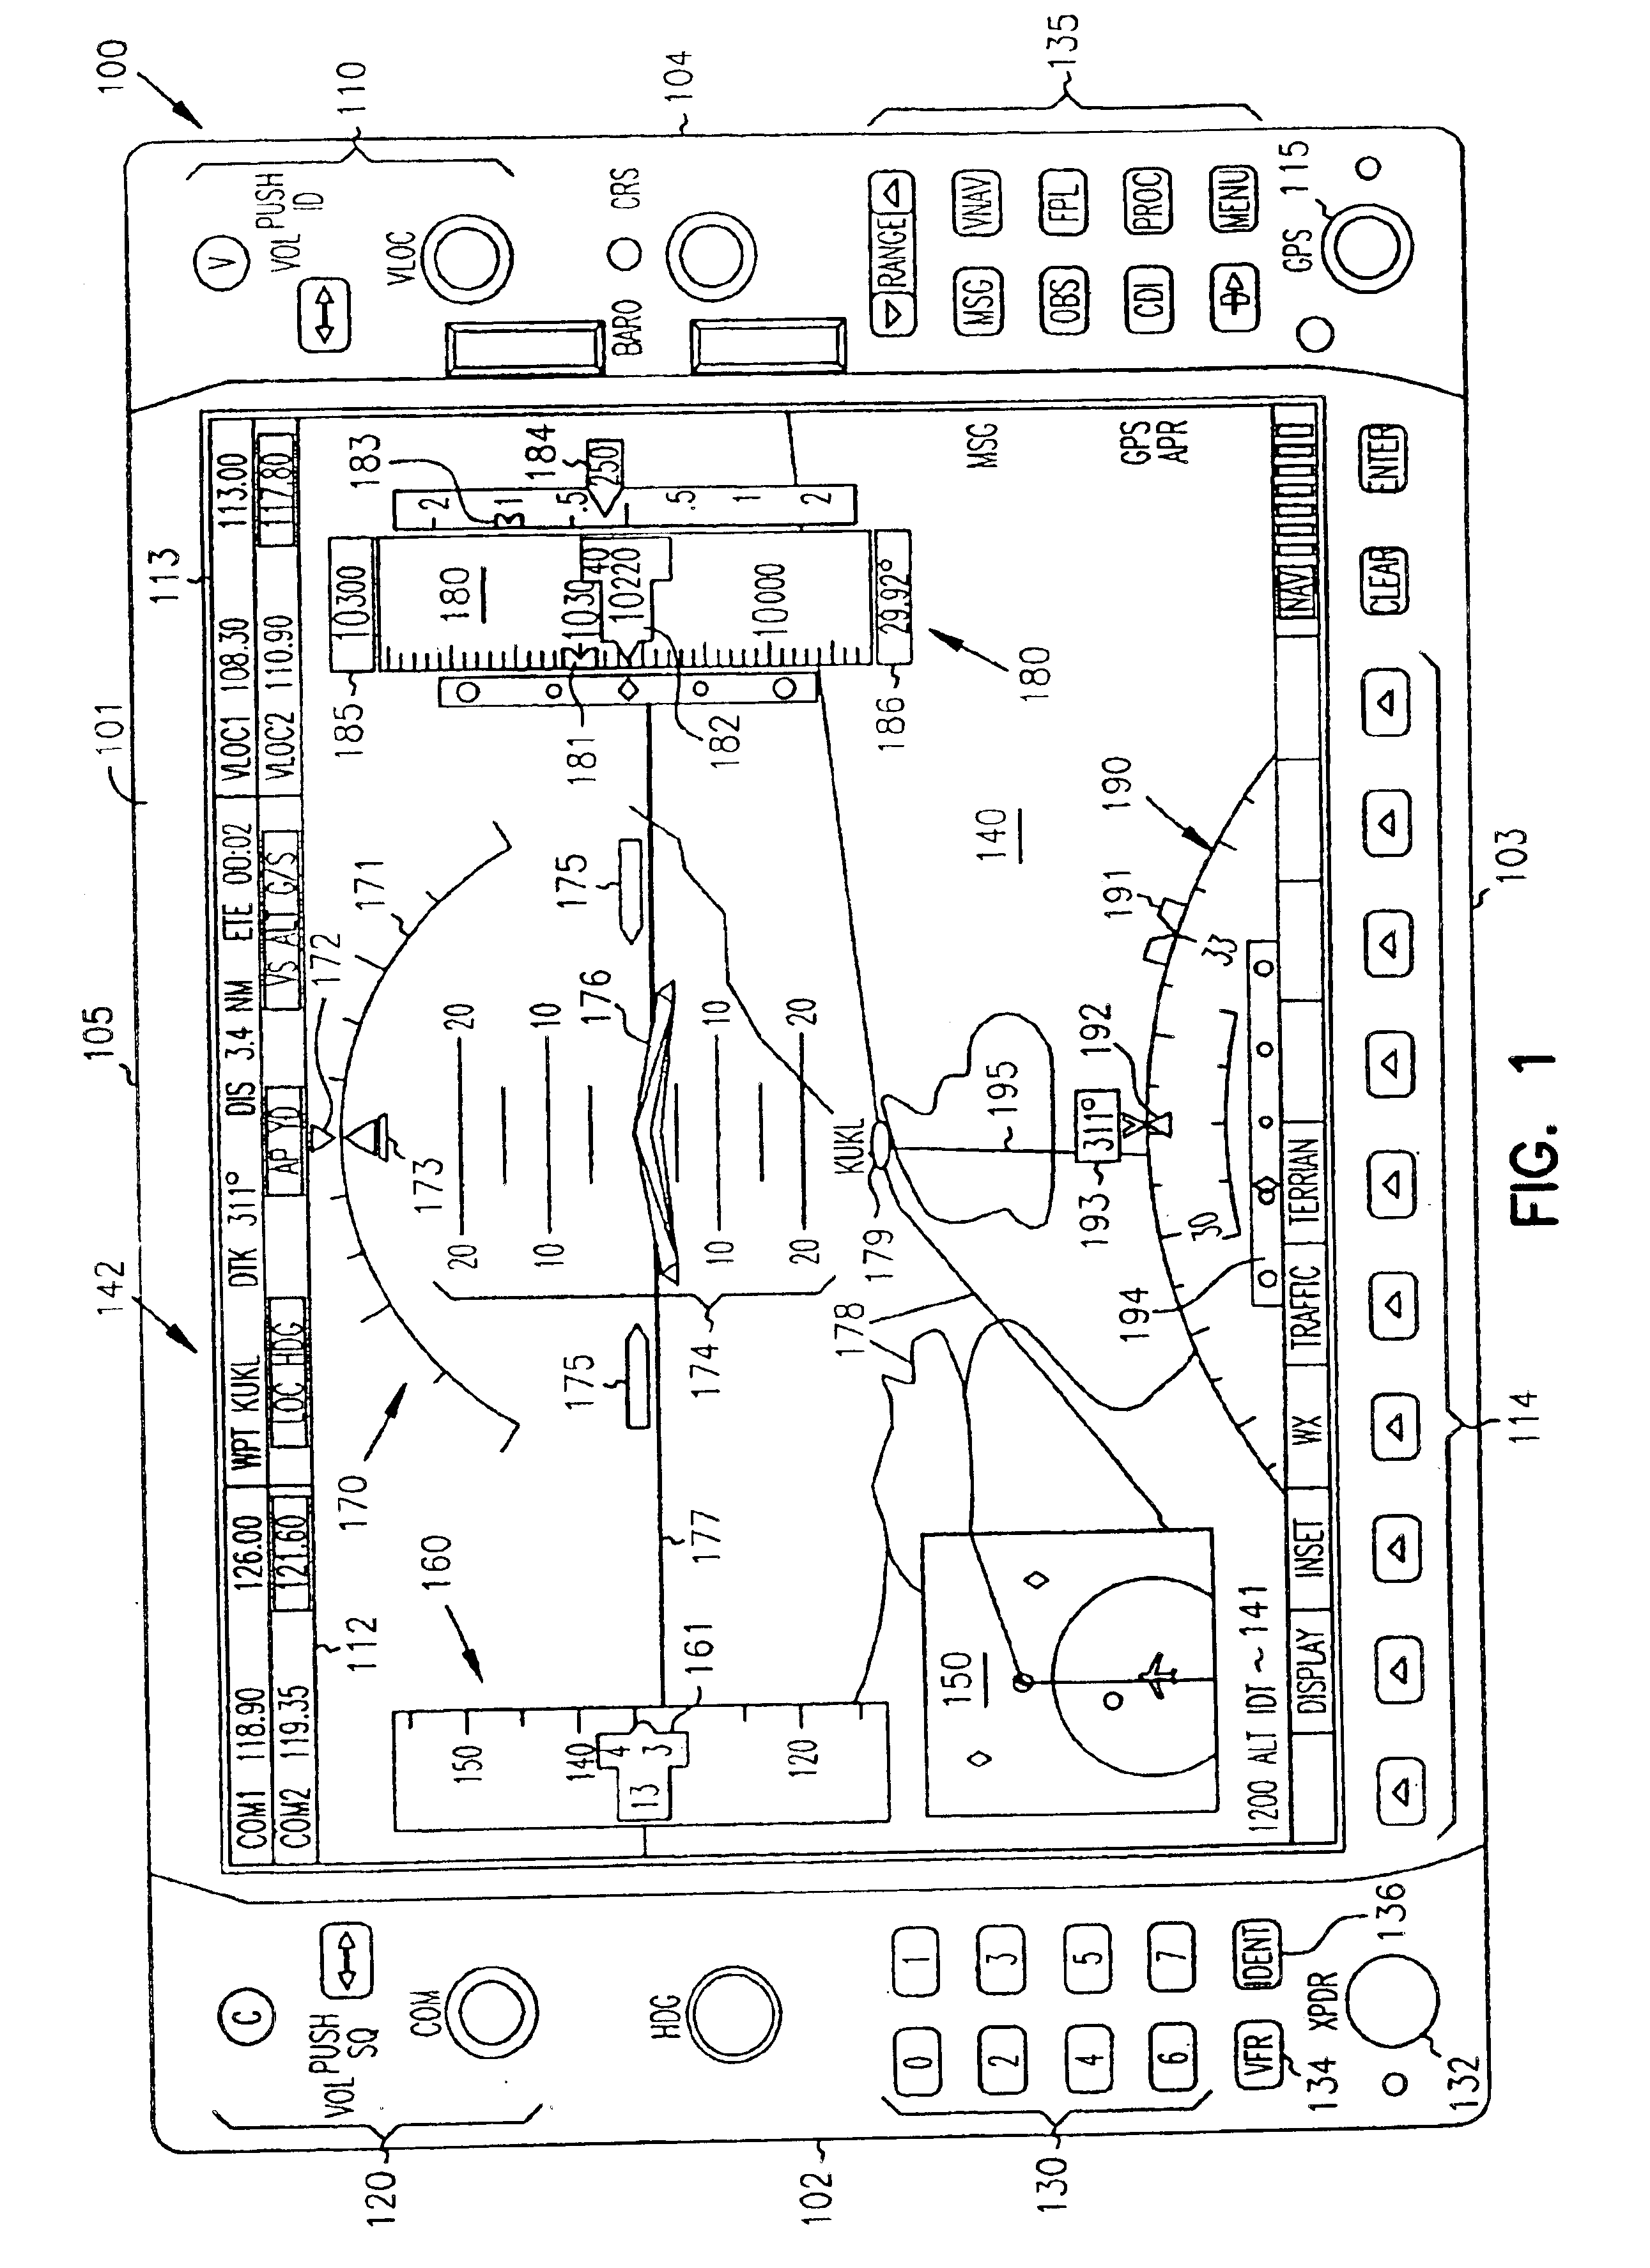 Cockpit instrument panel systems and methods with redundant flight data display